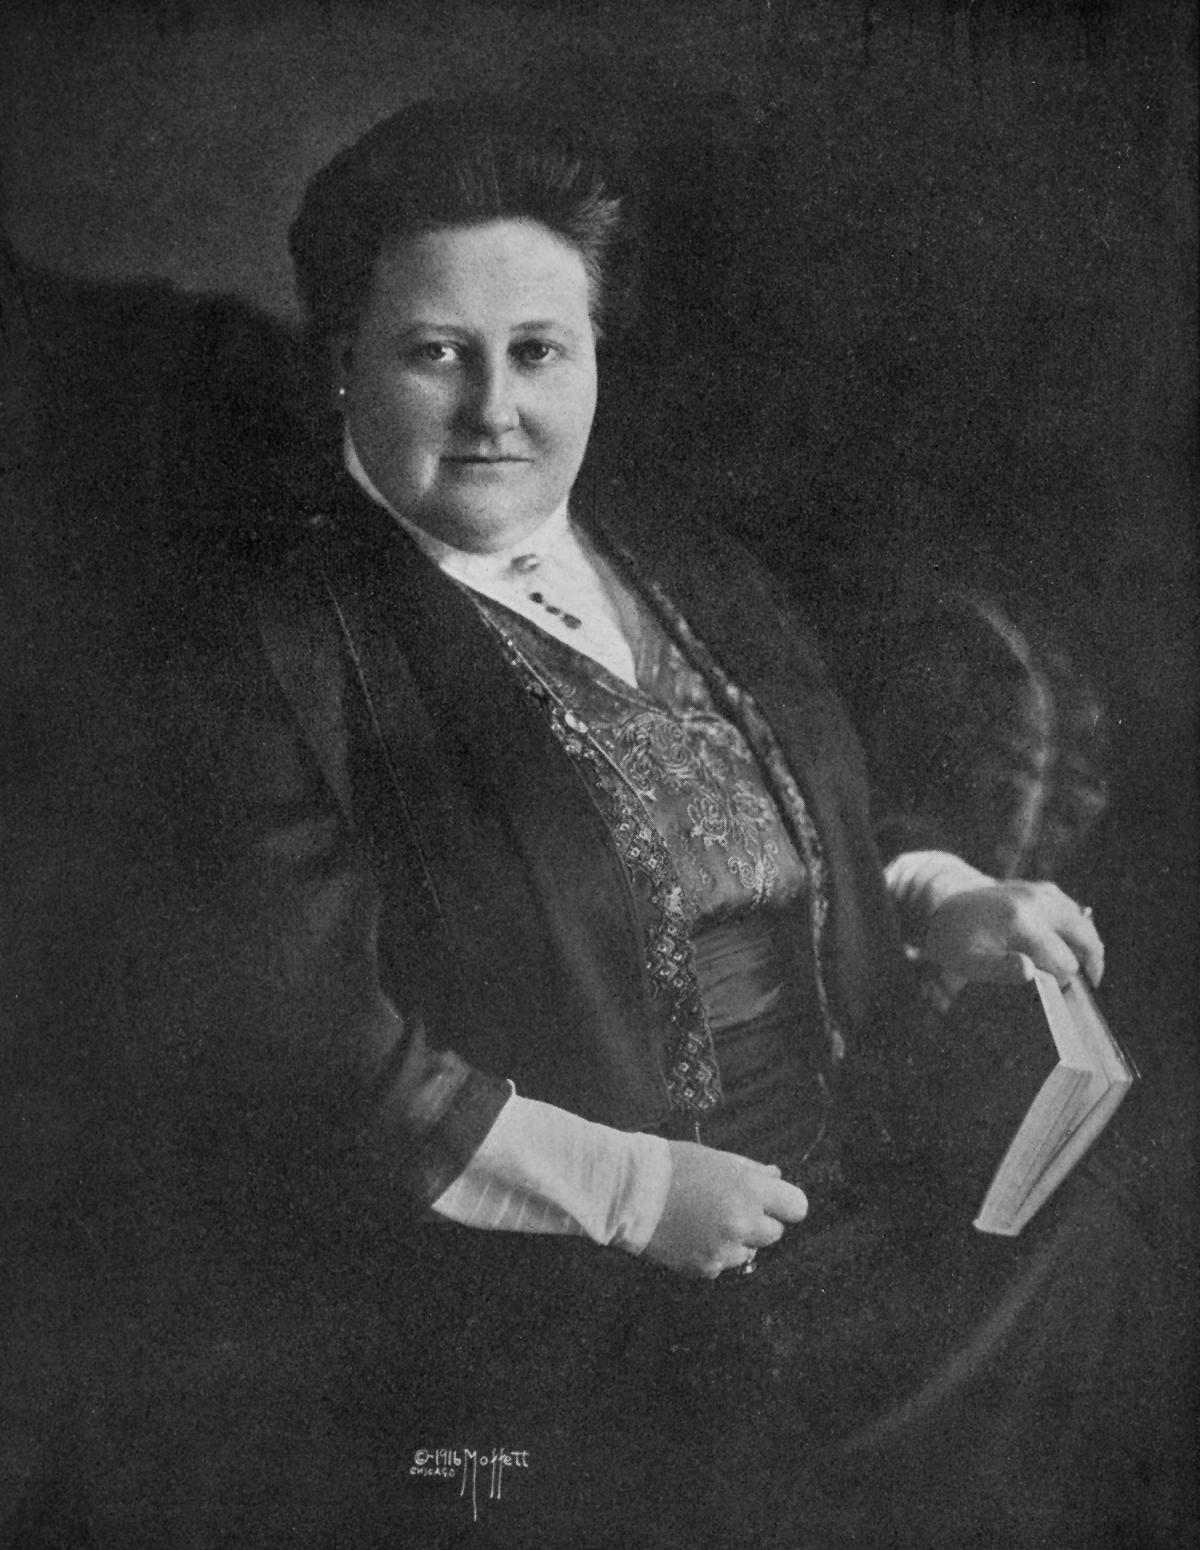 Lowell, wearing a black dress with a high necked white collar, seated